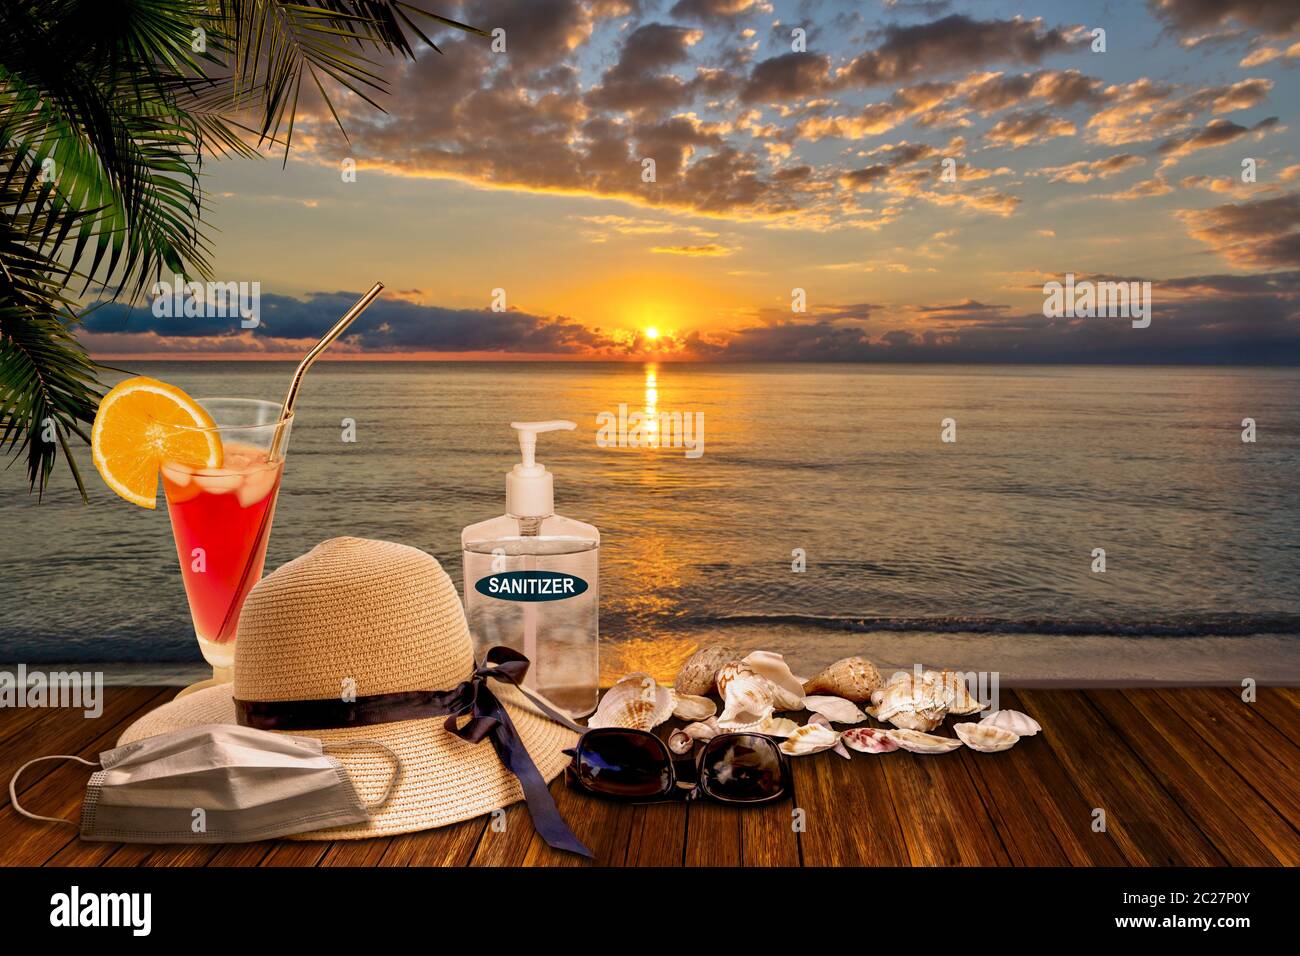 Vacationing in the New Normal after COVID-19 coronavirus pandemic. Tourism concept showing sunset beach with hand sanitizer, medical face mask among b Stock Photo